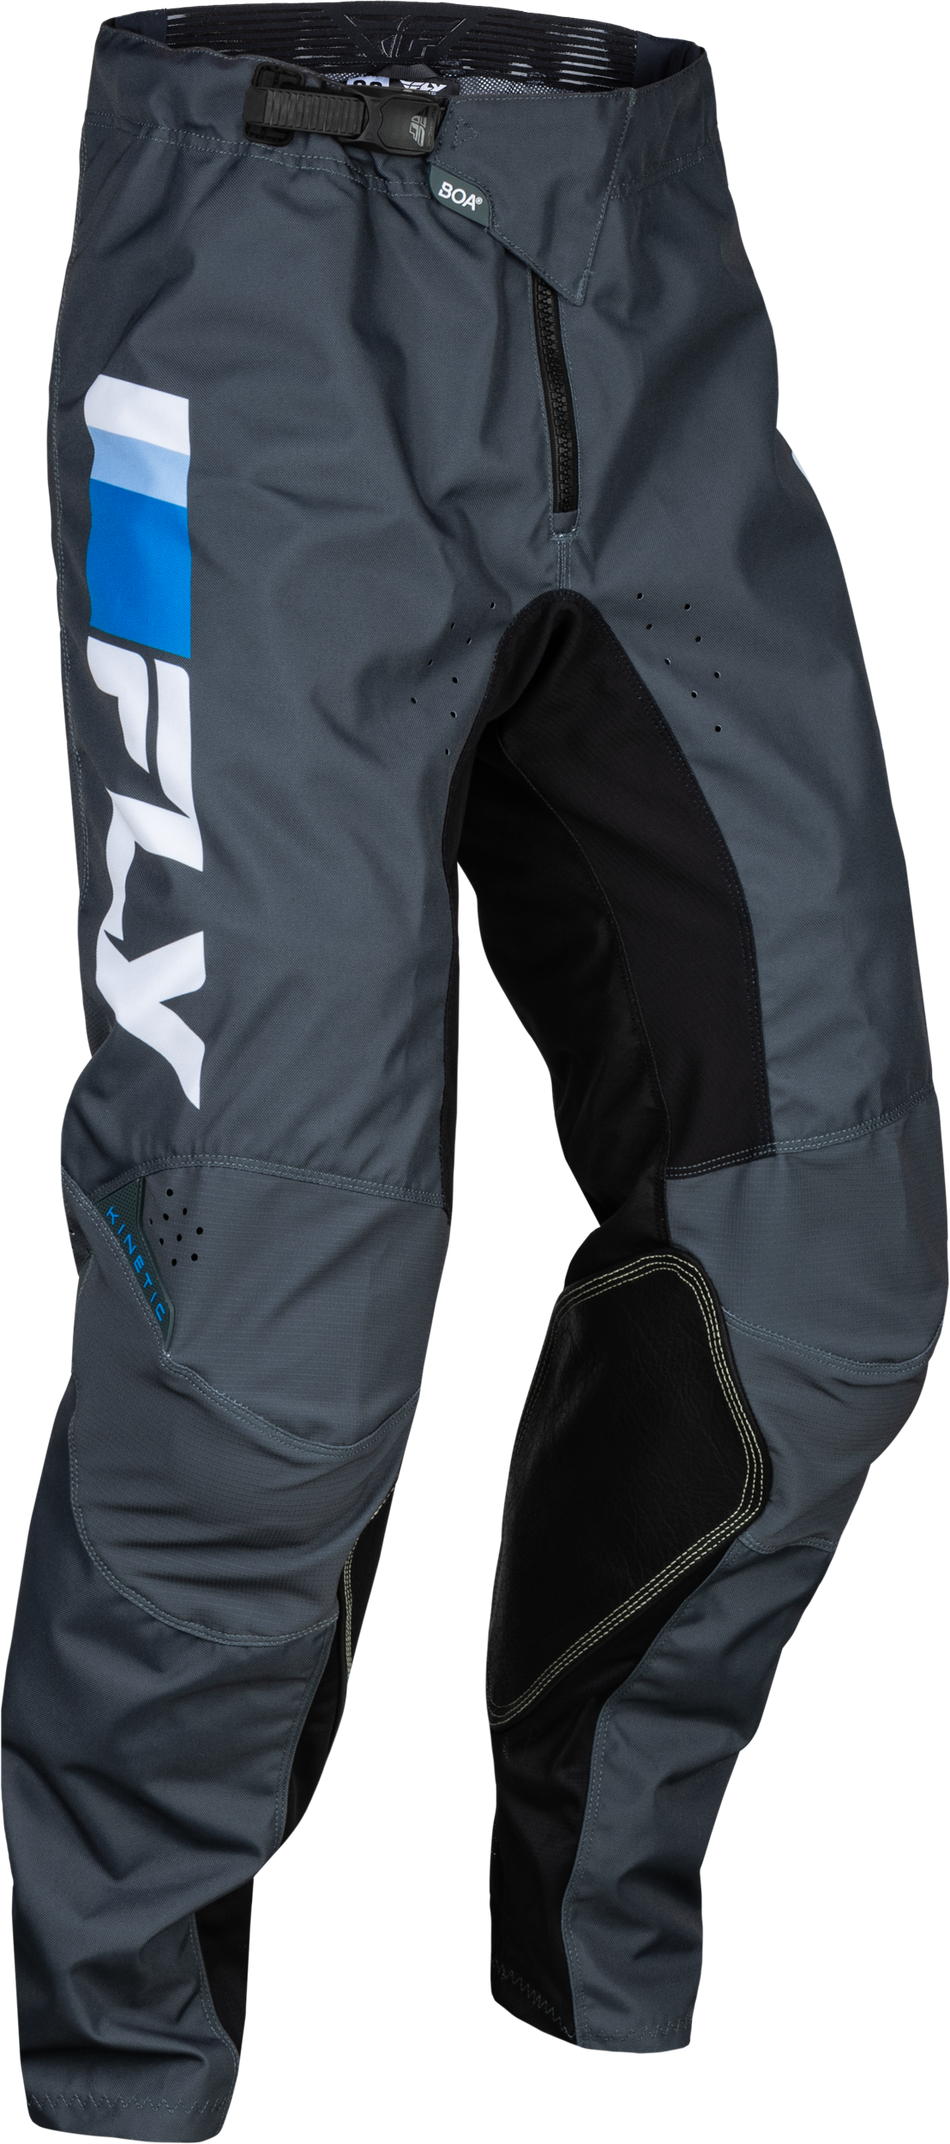 FLY RACING Youth Kinetic Prix Pants Bright Blue/Charcoal/Wht Sz 18 377-43018